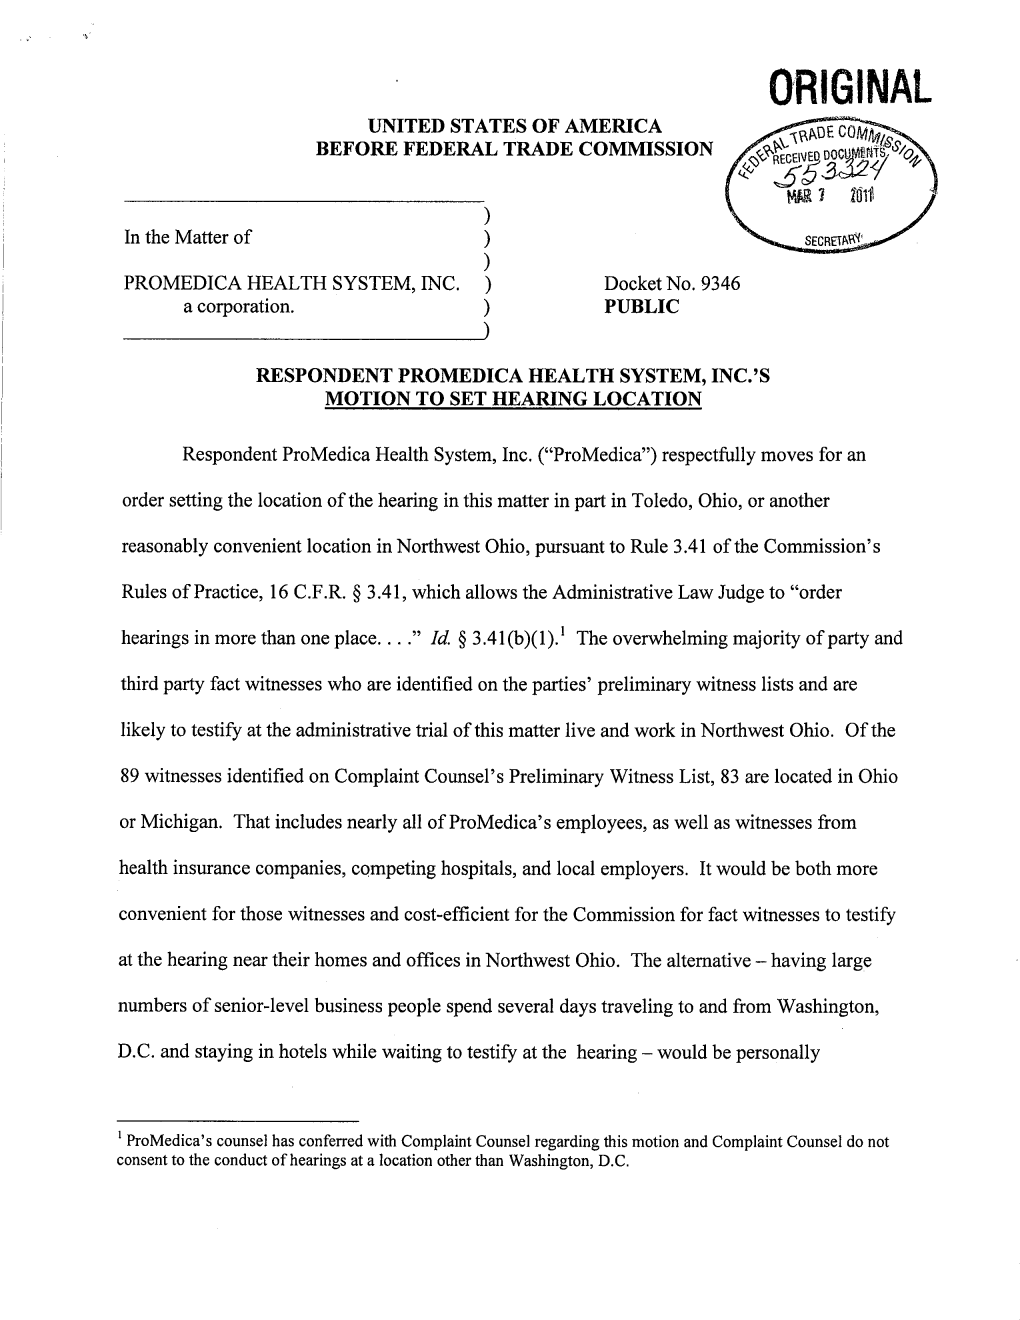 Respondent Promedica Health System, Inc.'S Motion to Set Hearing Location